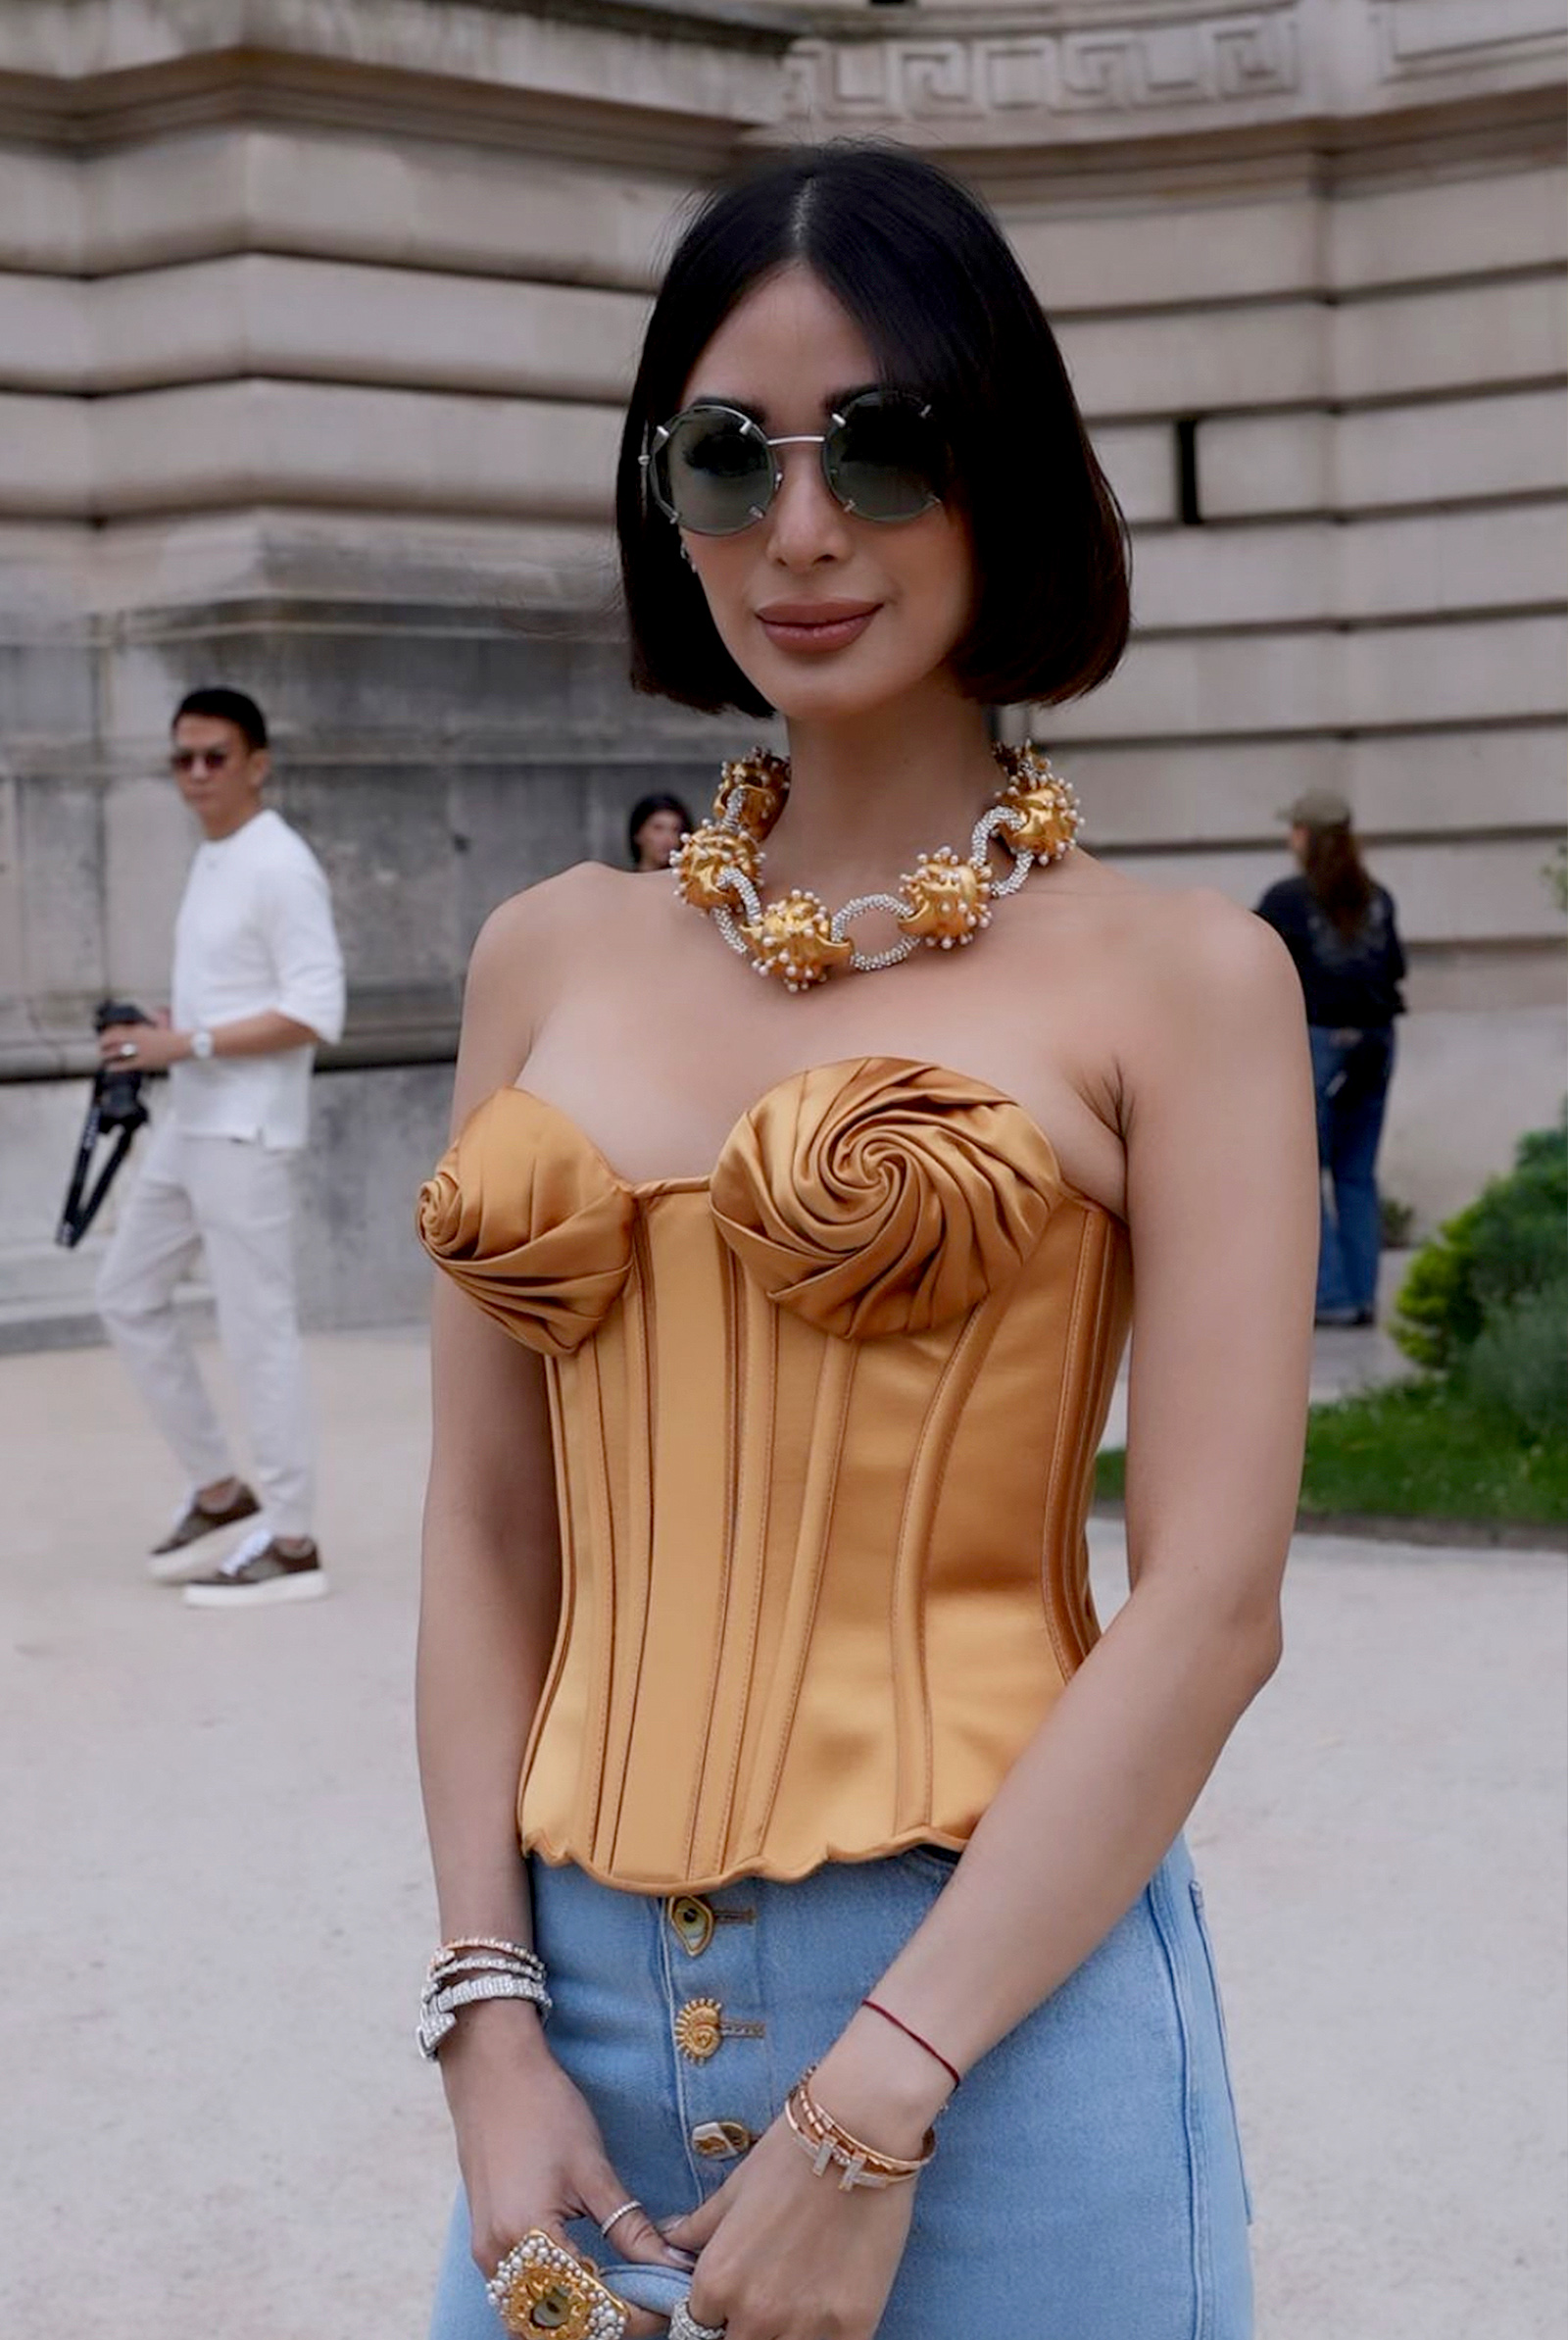 Heart Evangelista Delivered The Best Outfits At Paris Haute Couture Week